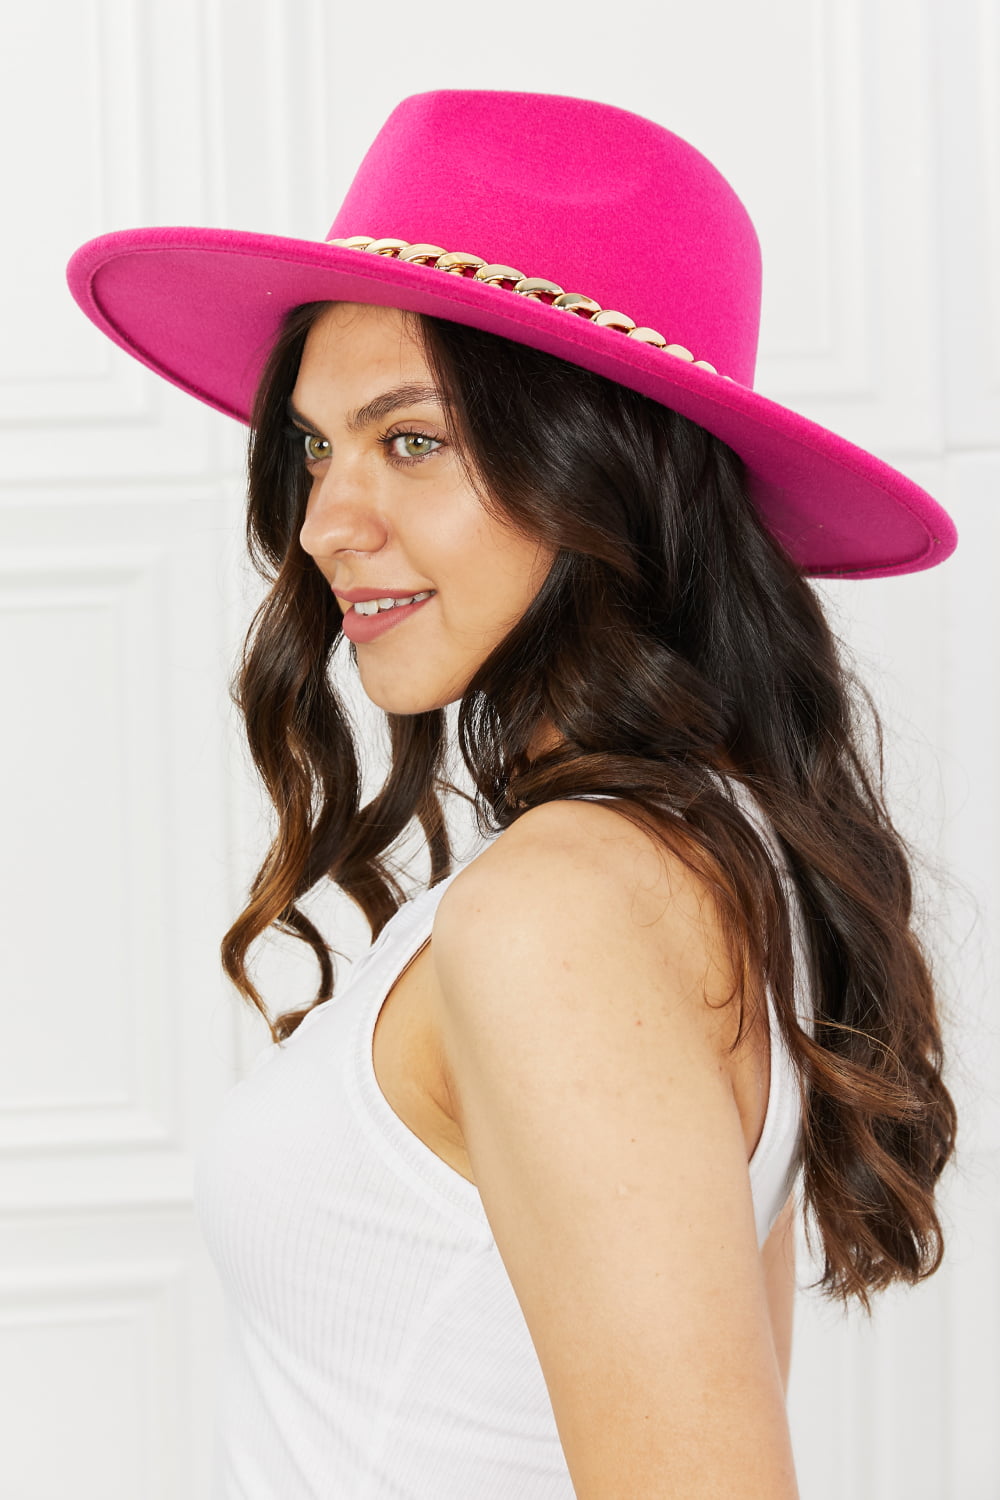 Fame Keep Your Promise Fedora Hat in Pink - Shop women apparel, Jewelry, bath & beauty products online - Arwen's Boutique